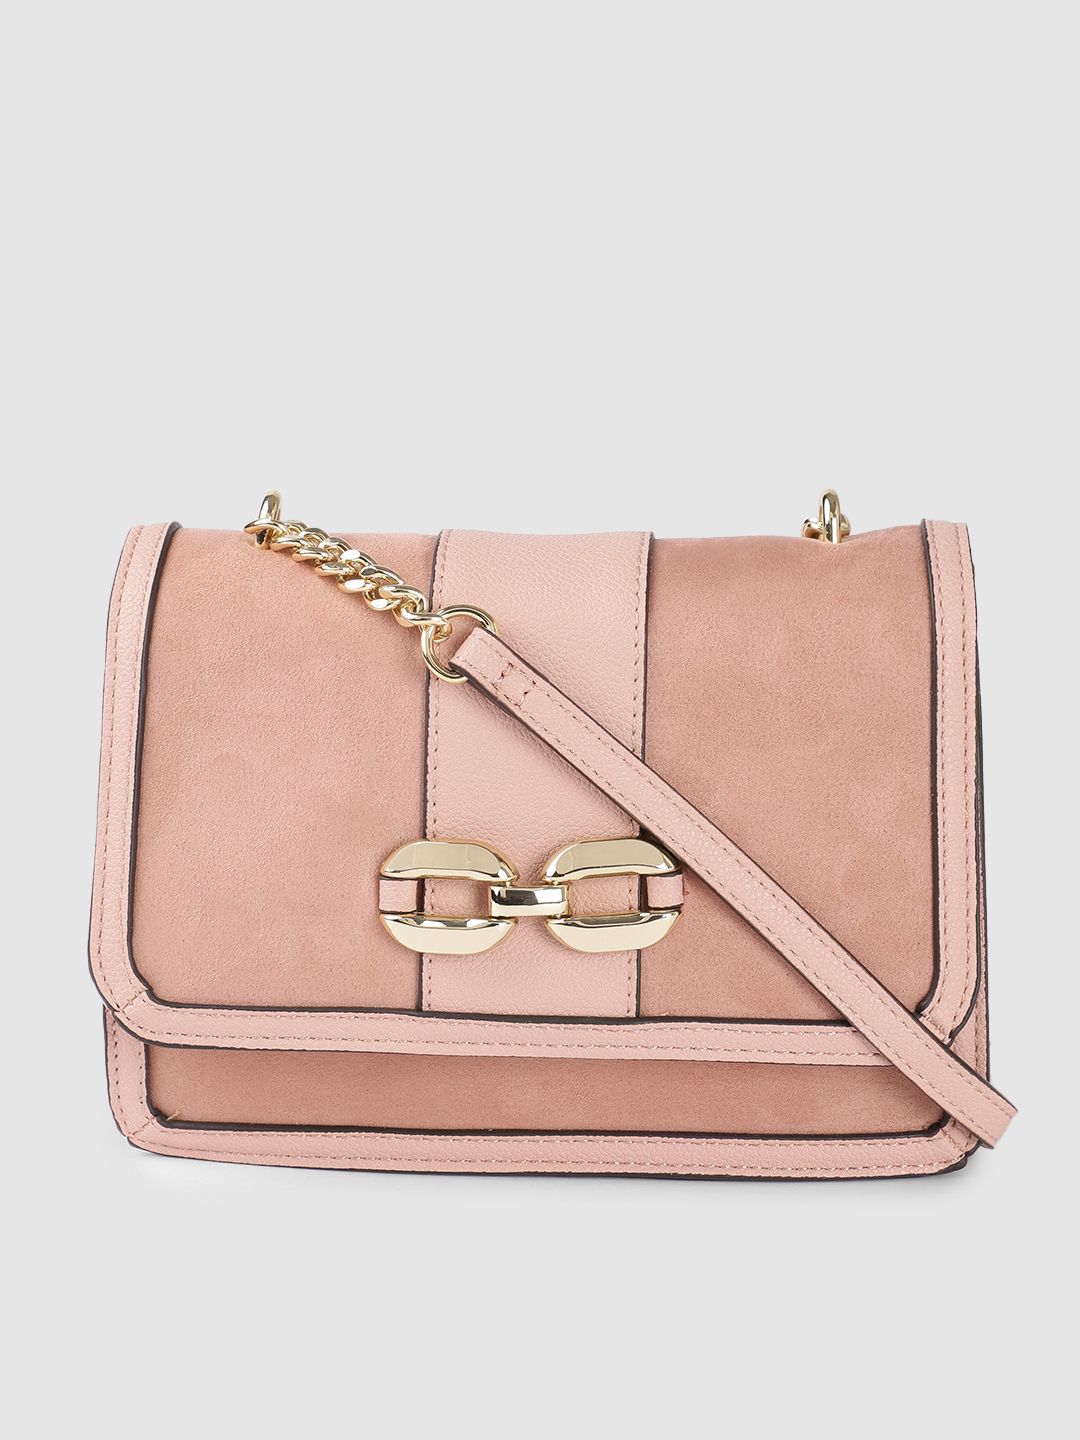 Accessorize Women Pink Solid Structured Sling Bag Price in India